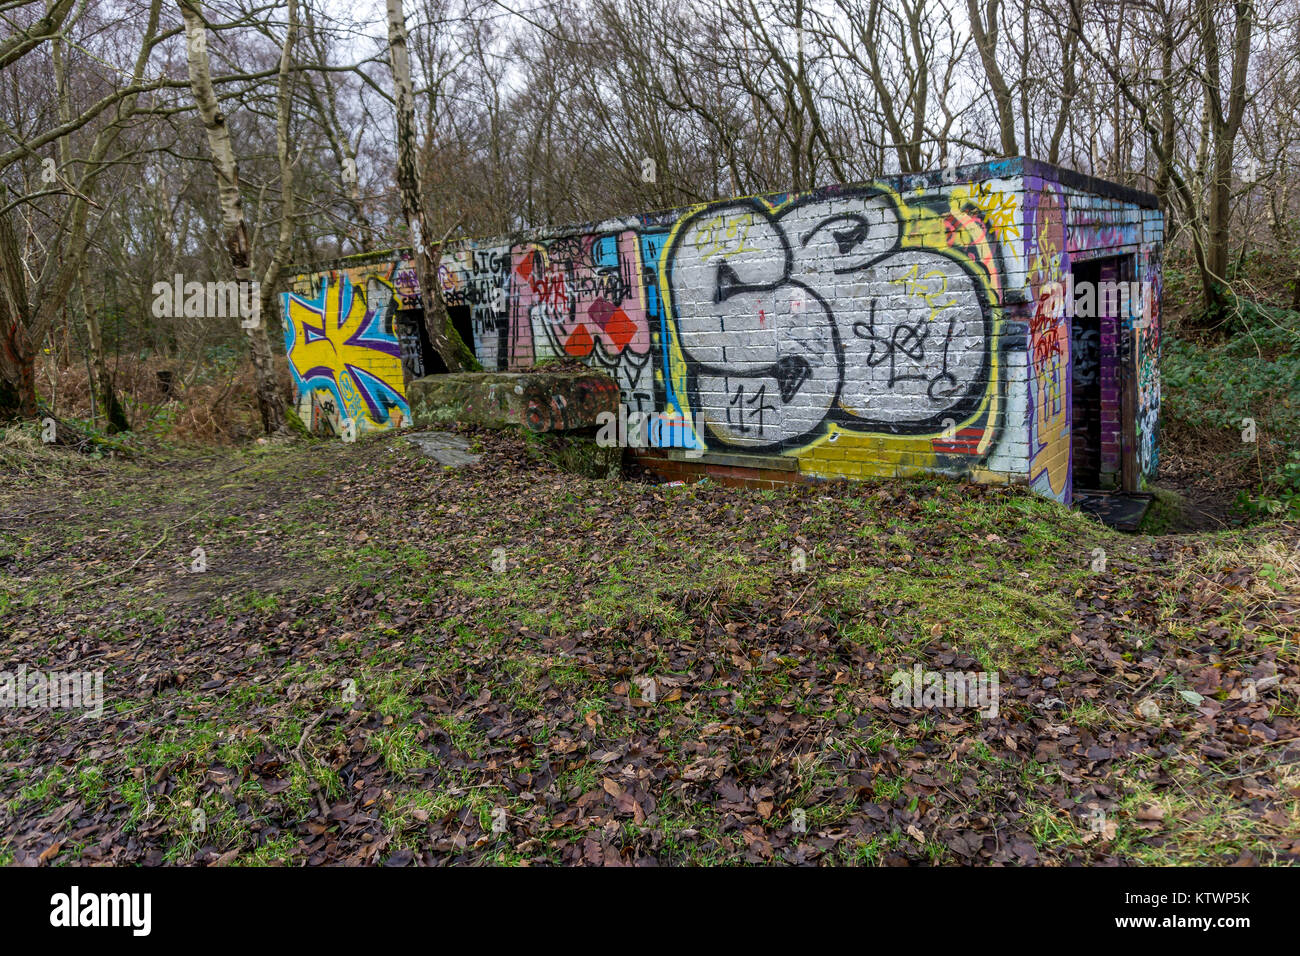 Graffitti covered old disused building in Honley Woods, Honley, Huddersfield, West Yorkshire, England, UK. Stock Photo